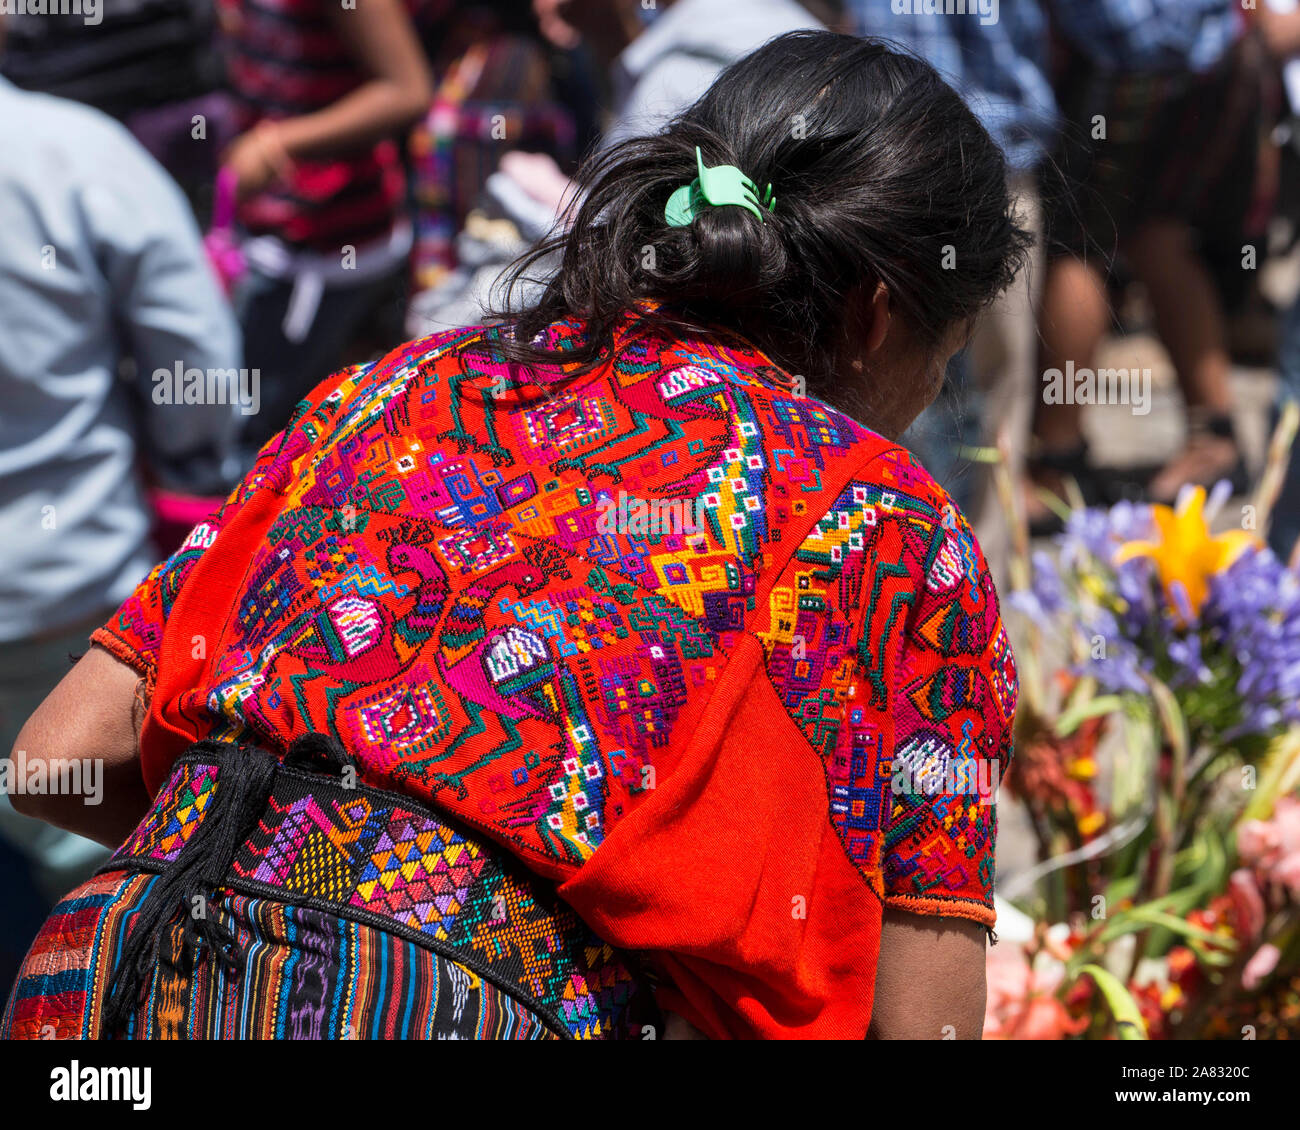 A woman at the Sunday market in Chichicastenango, Guatemala wears the traditional colorful woven huipil or blouse from that town. Stock Photo